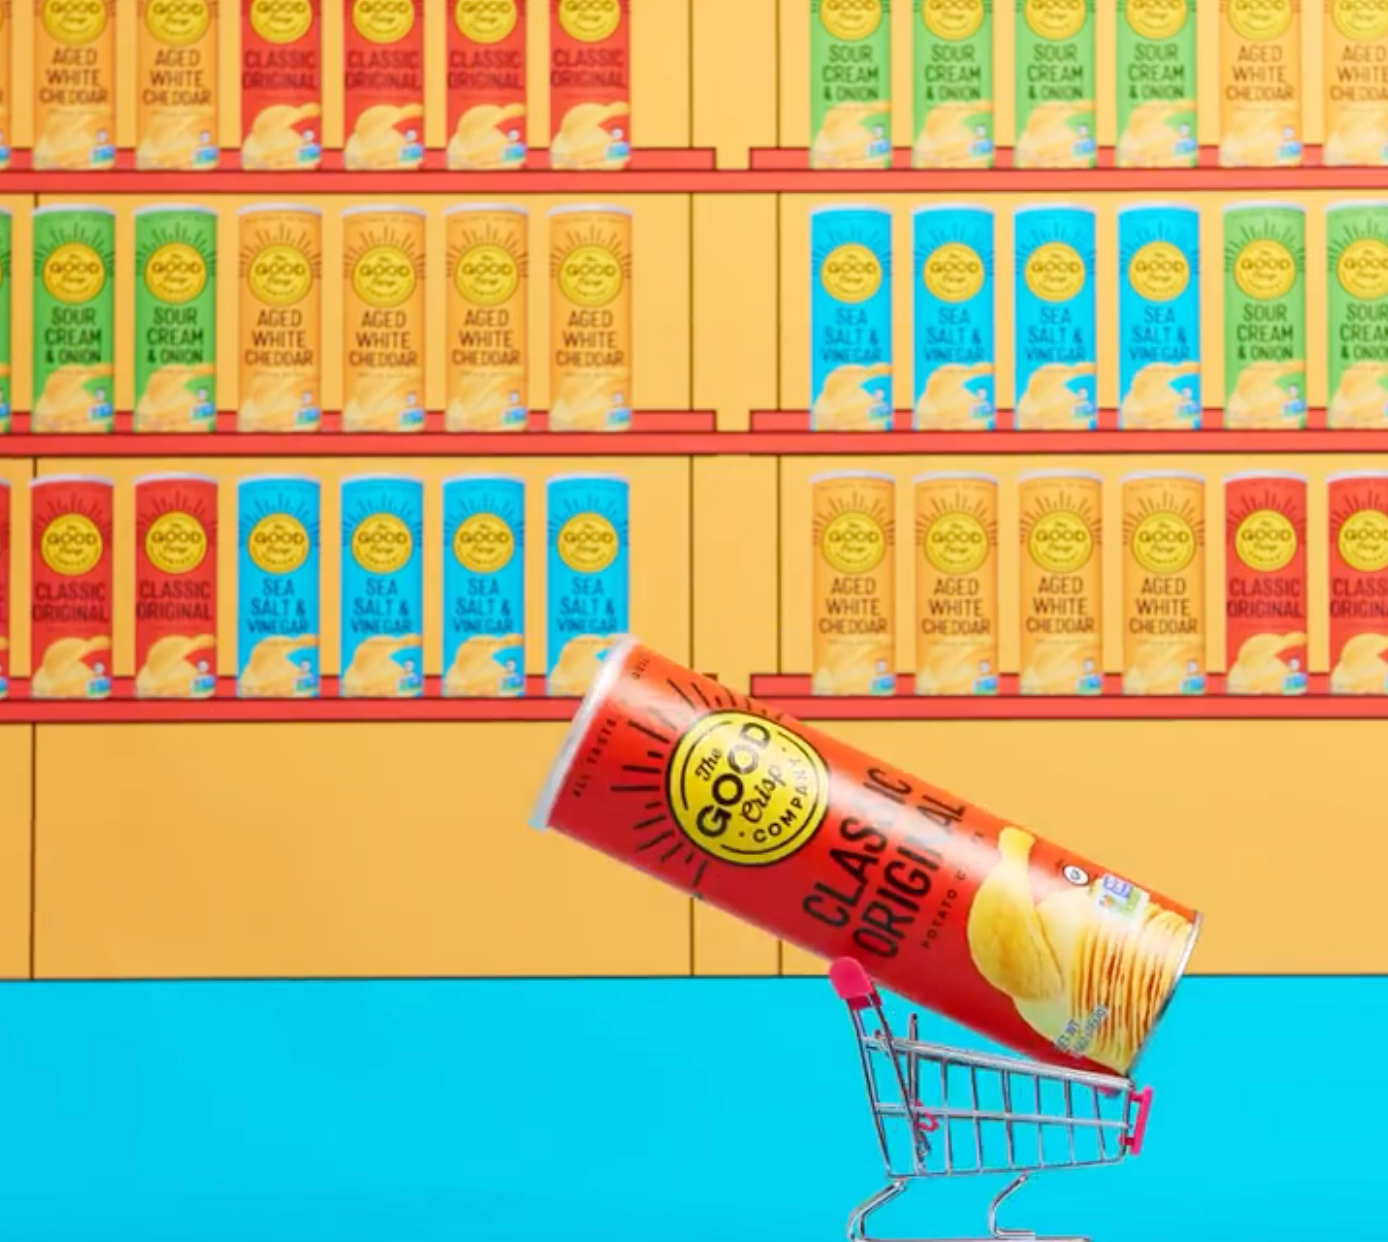 Canister of Classic original in a tiny shopping cart with wall of Good Crisp products behind